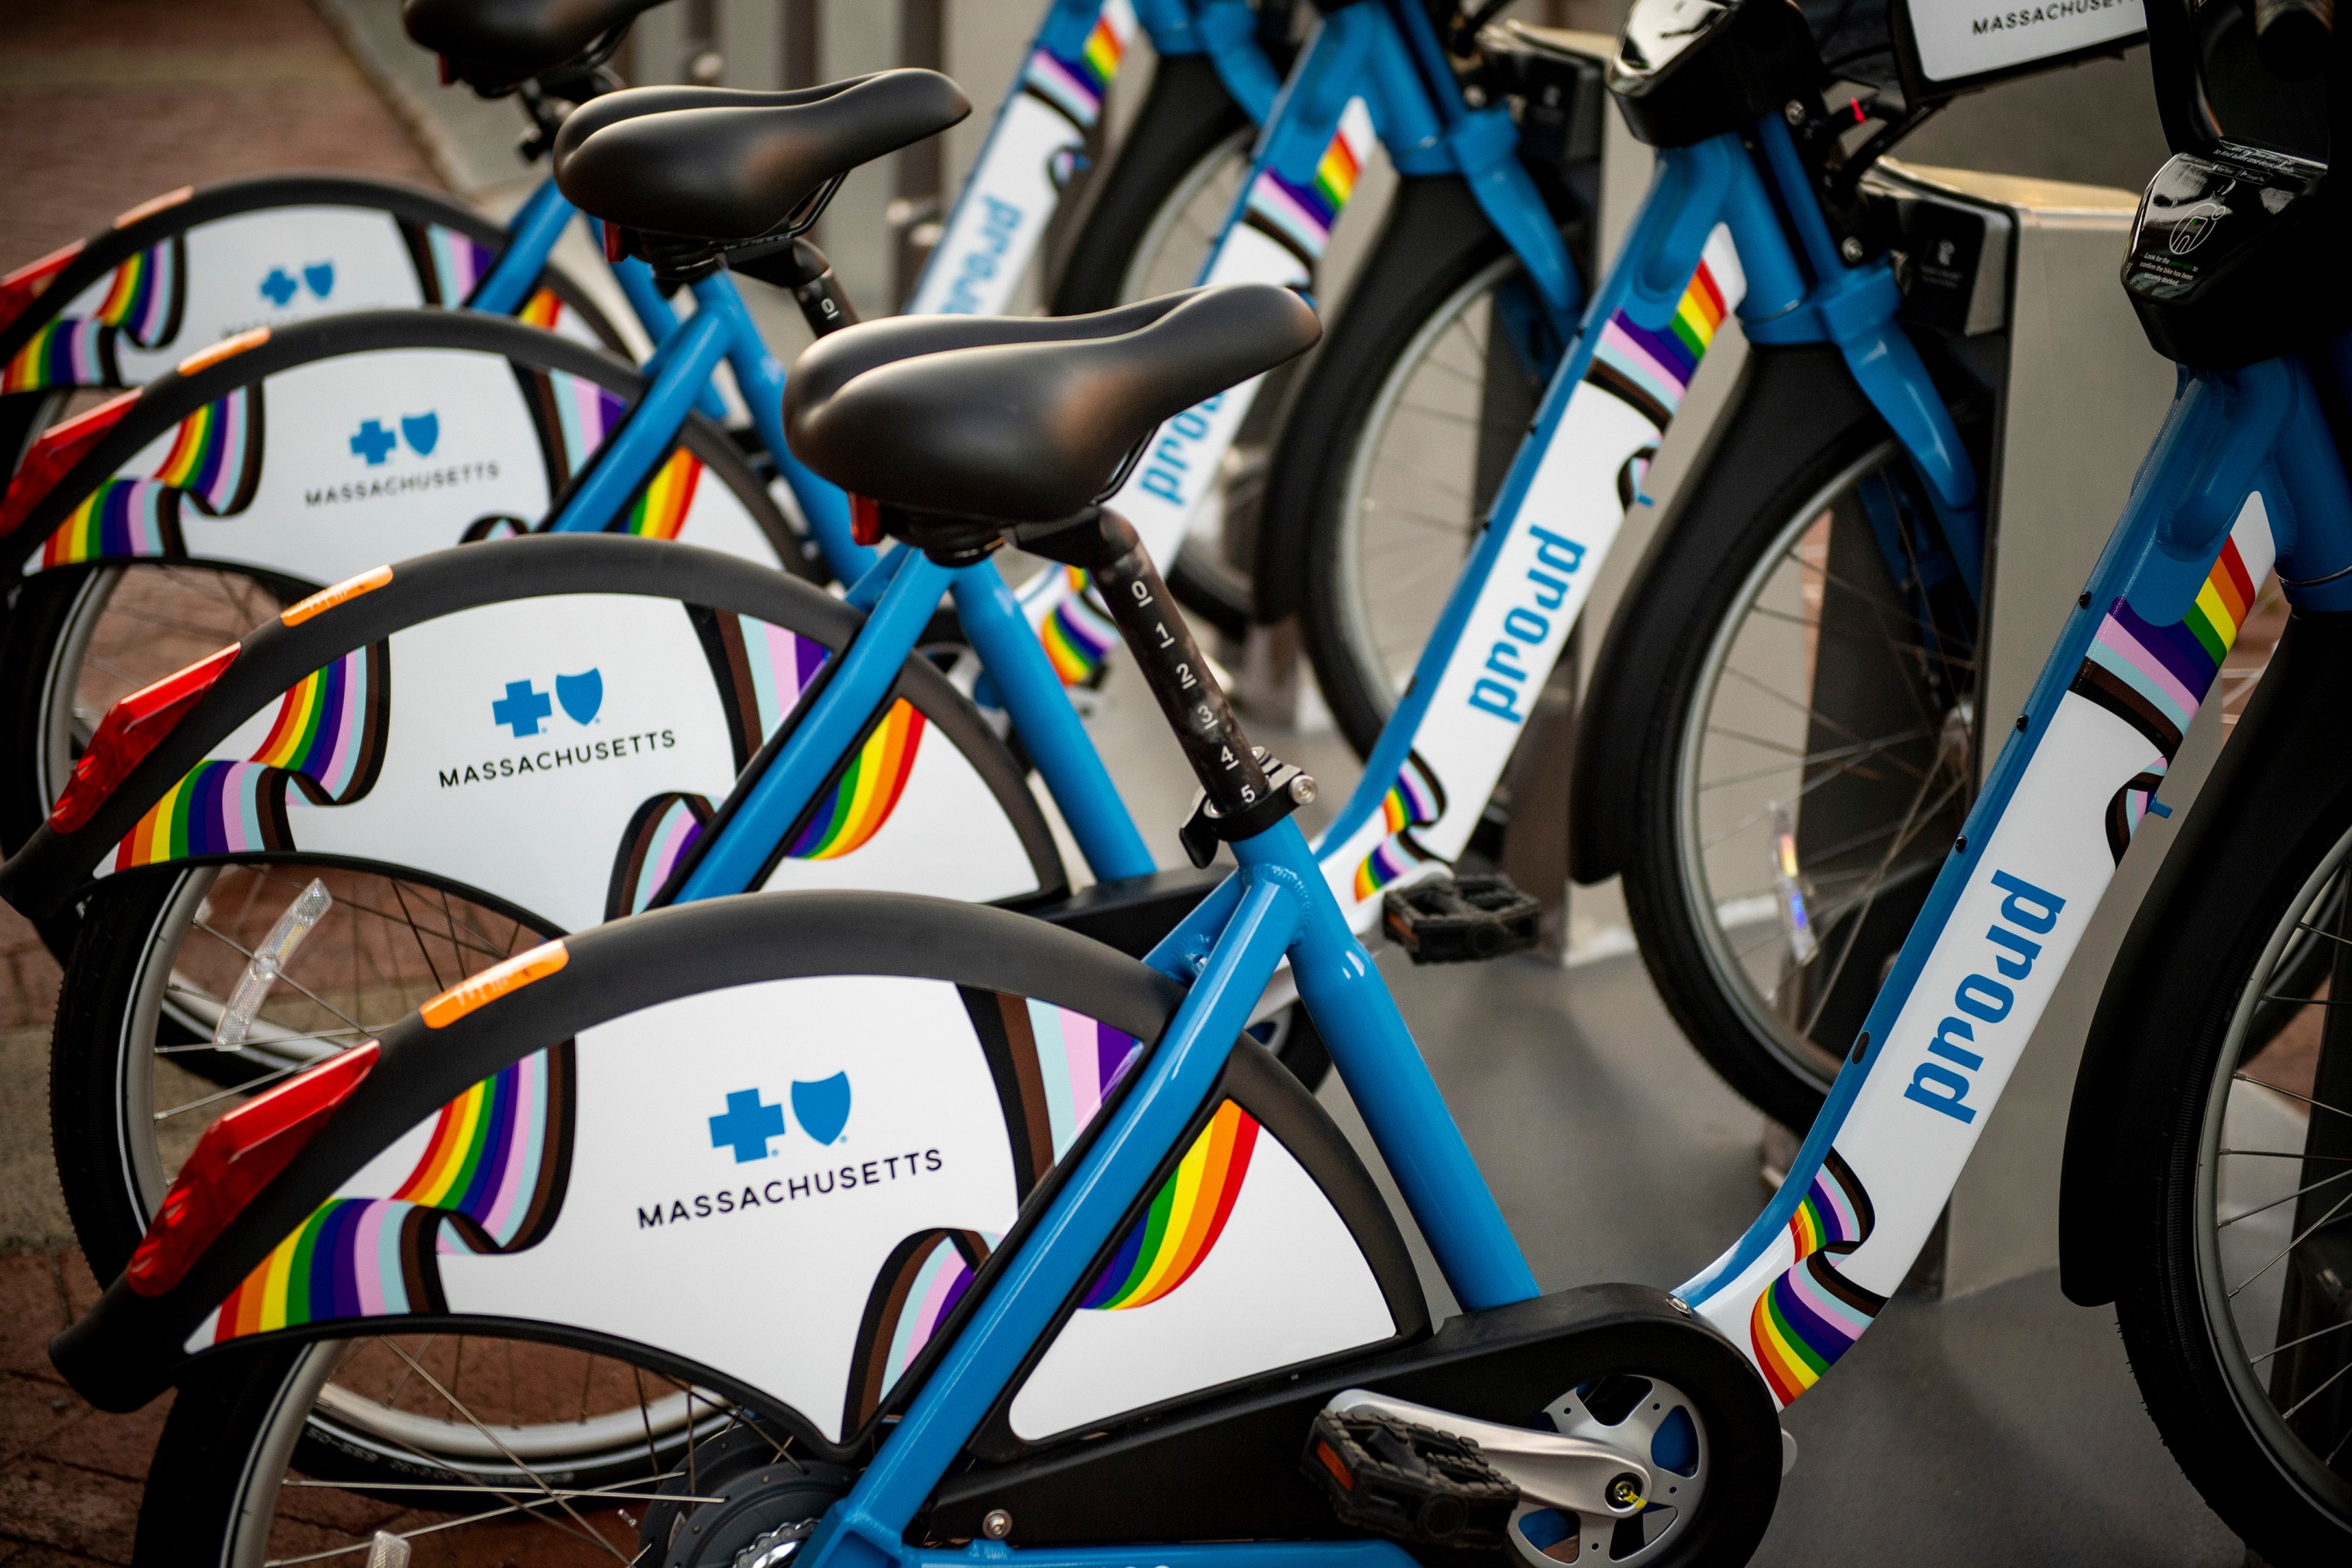 A row of parked Bluebikes showing a rainbow-themed Pride decorations on the rear fenders and downtube of each bike.